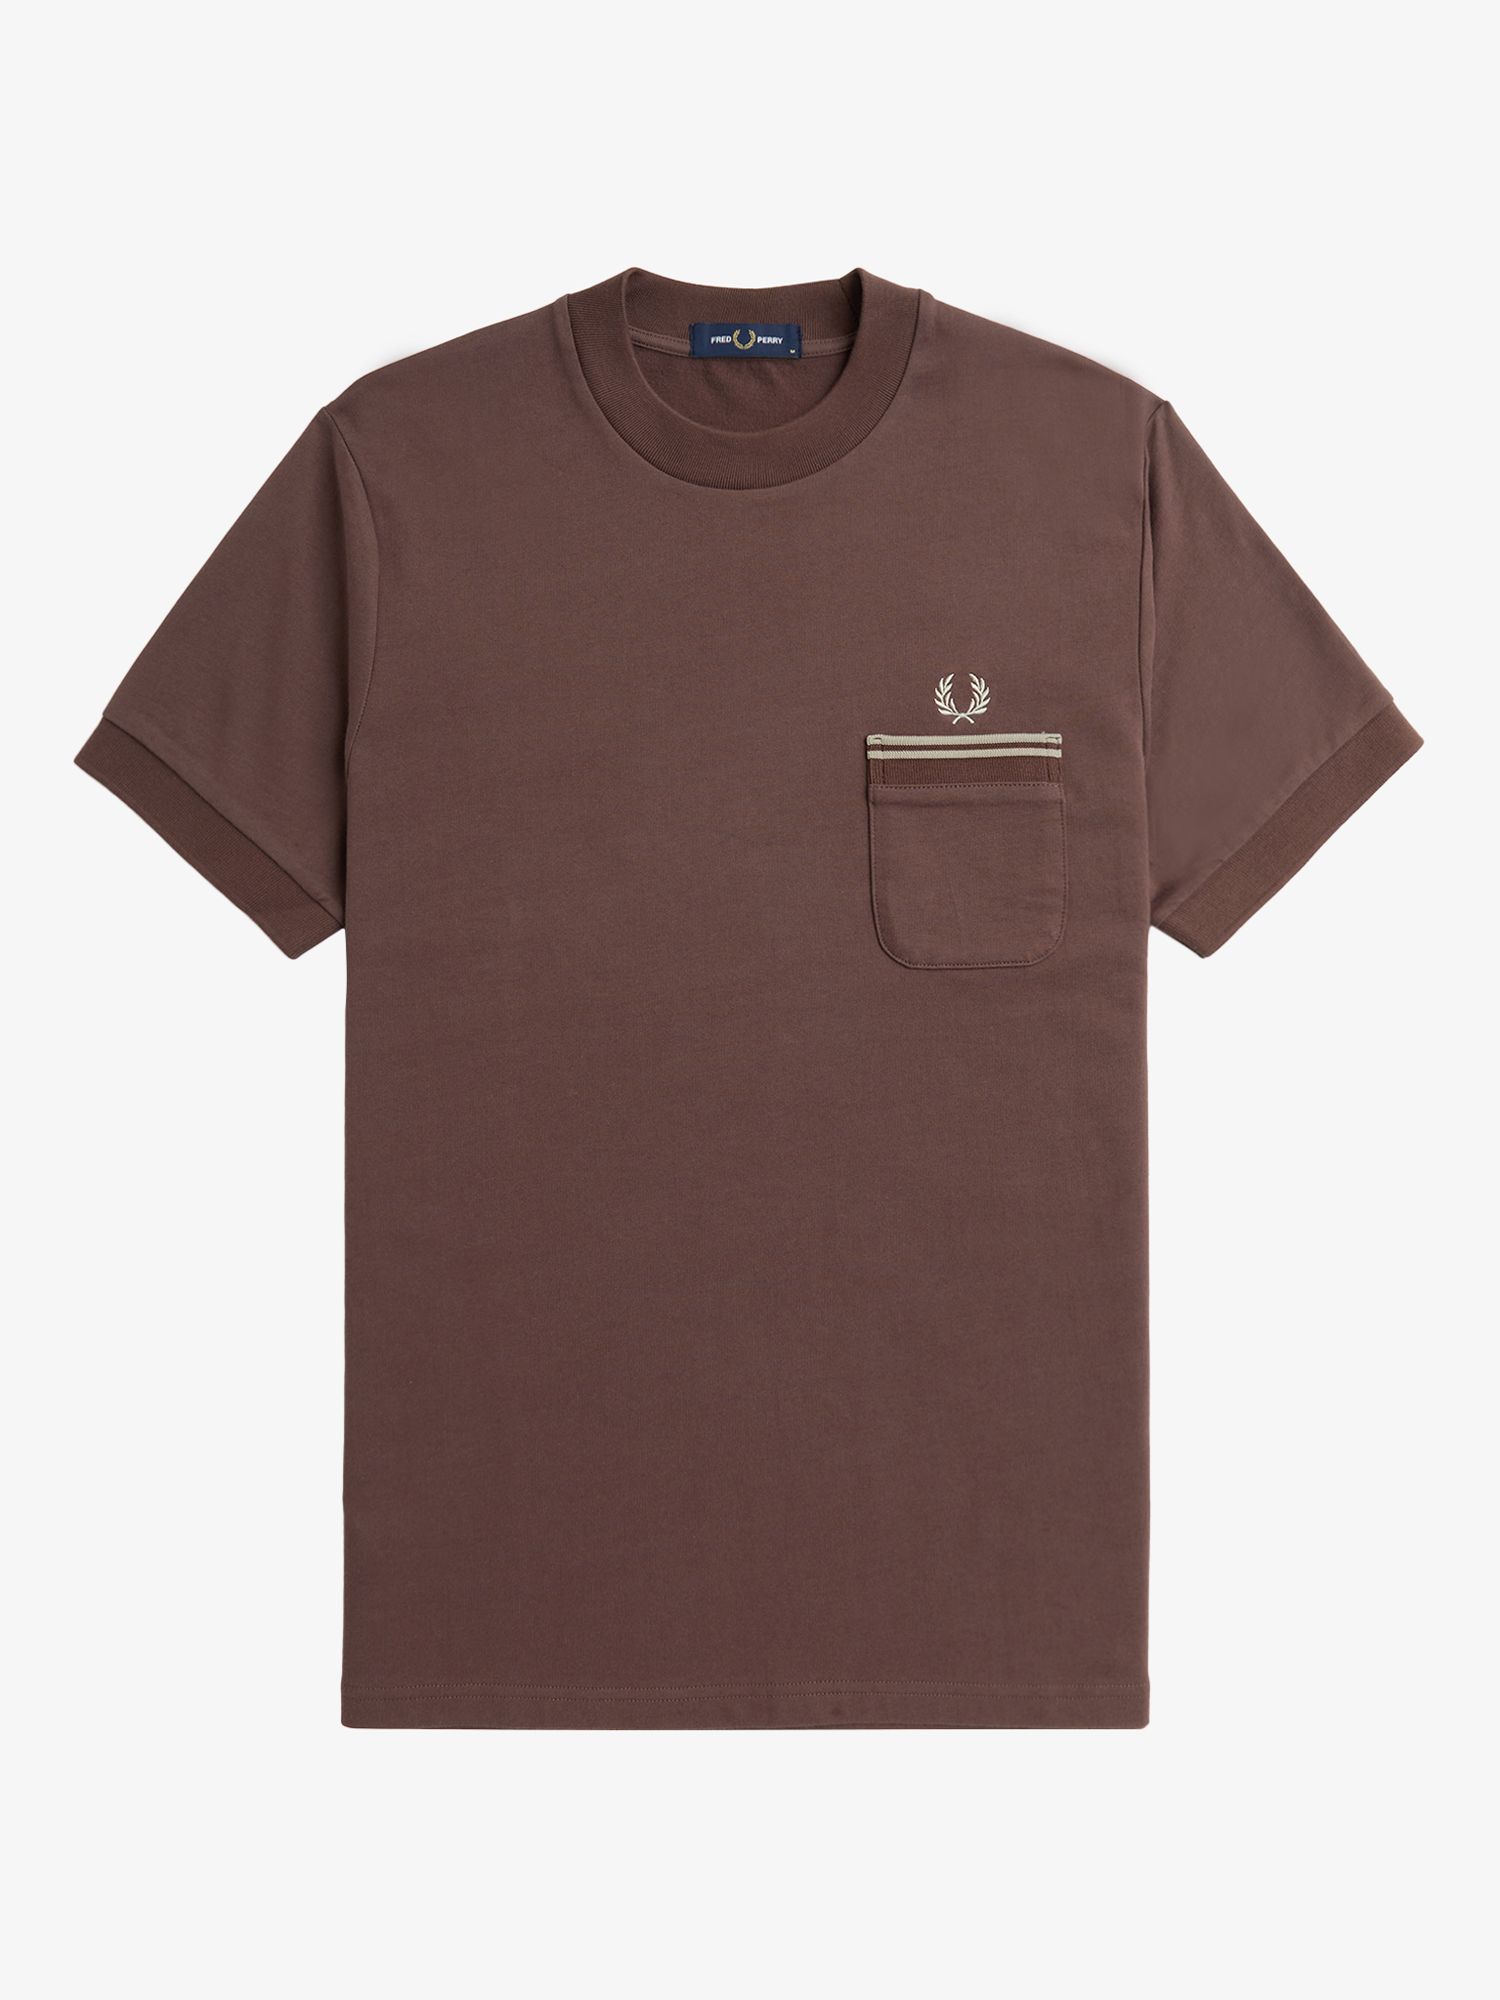 Fred Perry Cotton Crew Neck T-Shirt, Red, M